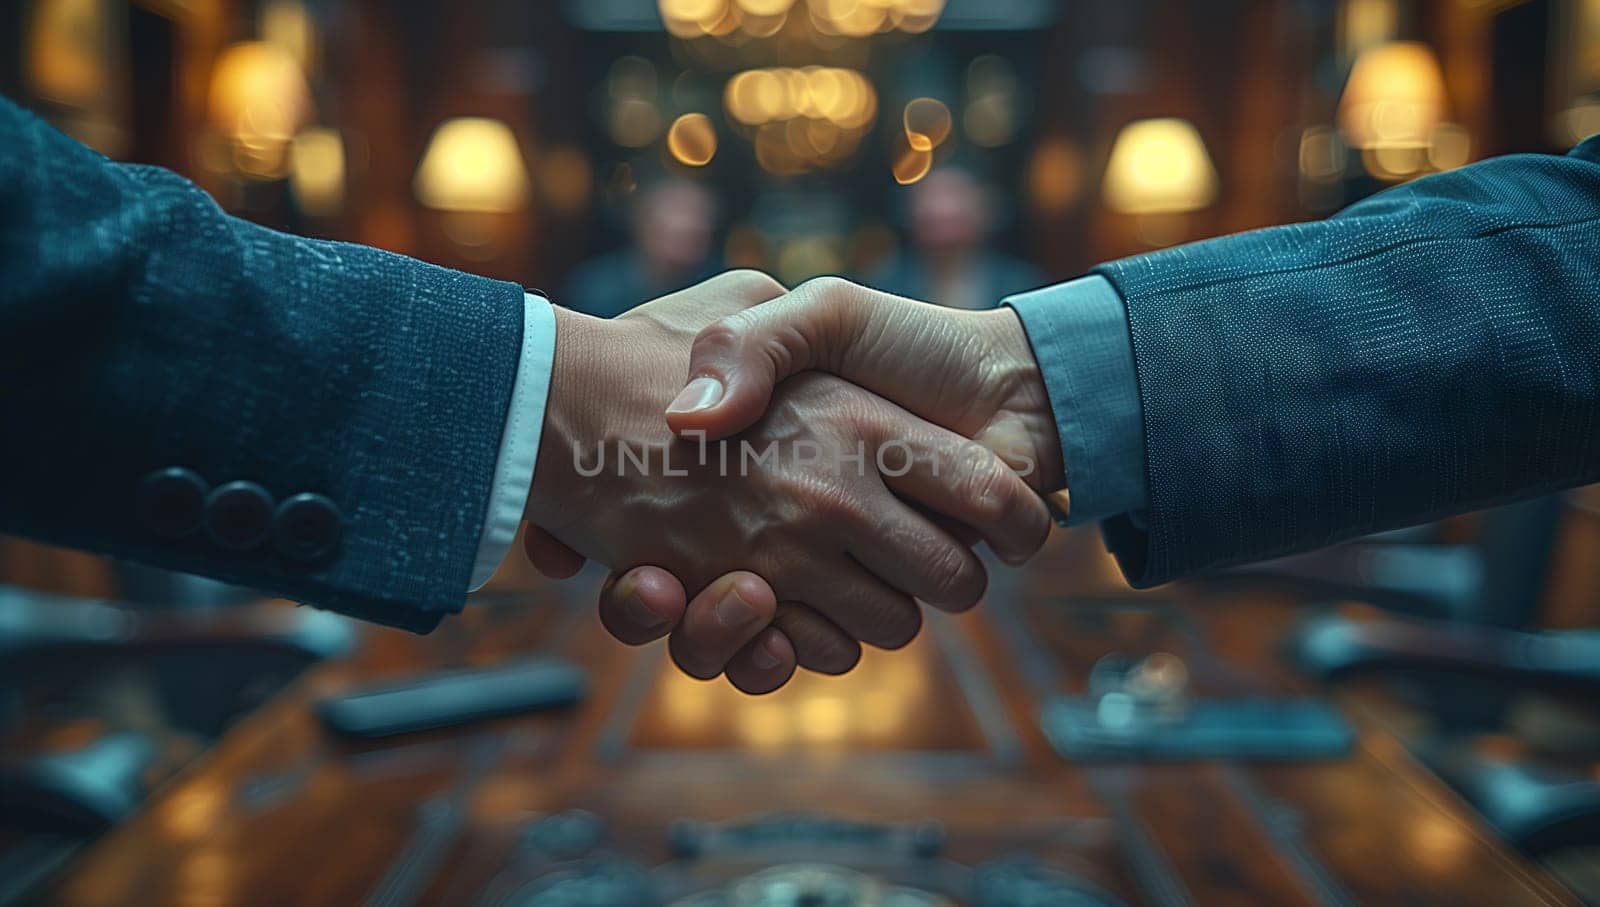 Two men in suits exchanging a firm handshake in a dimly lit room by richwolf